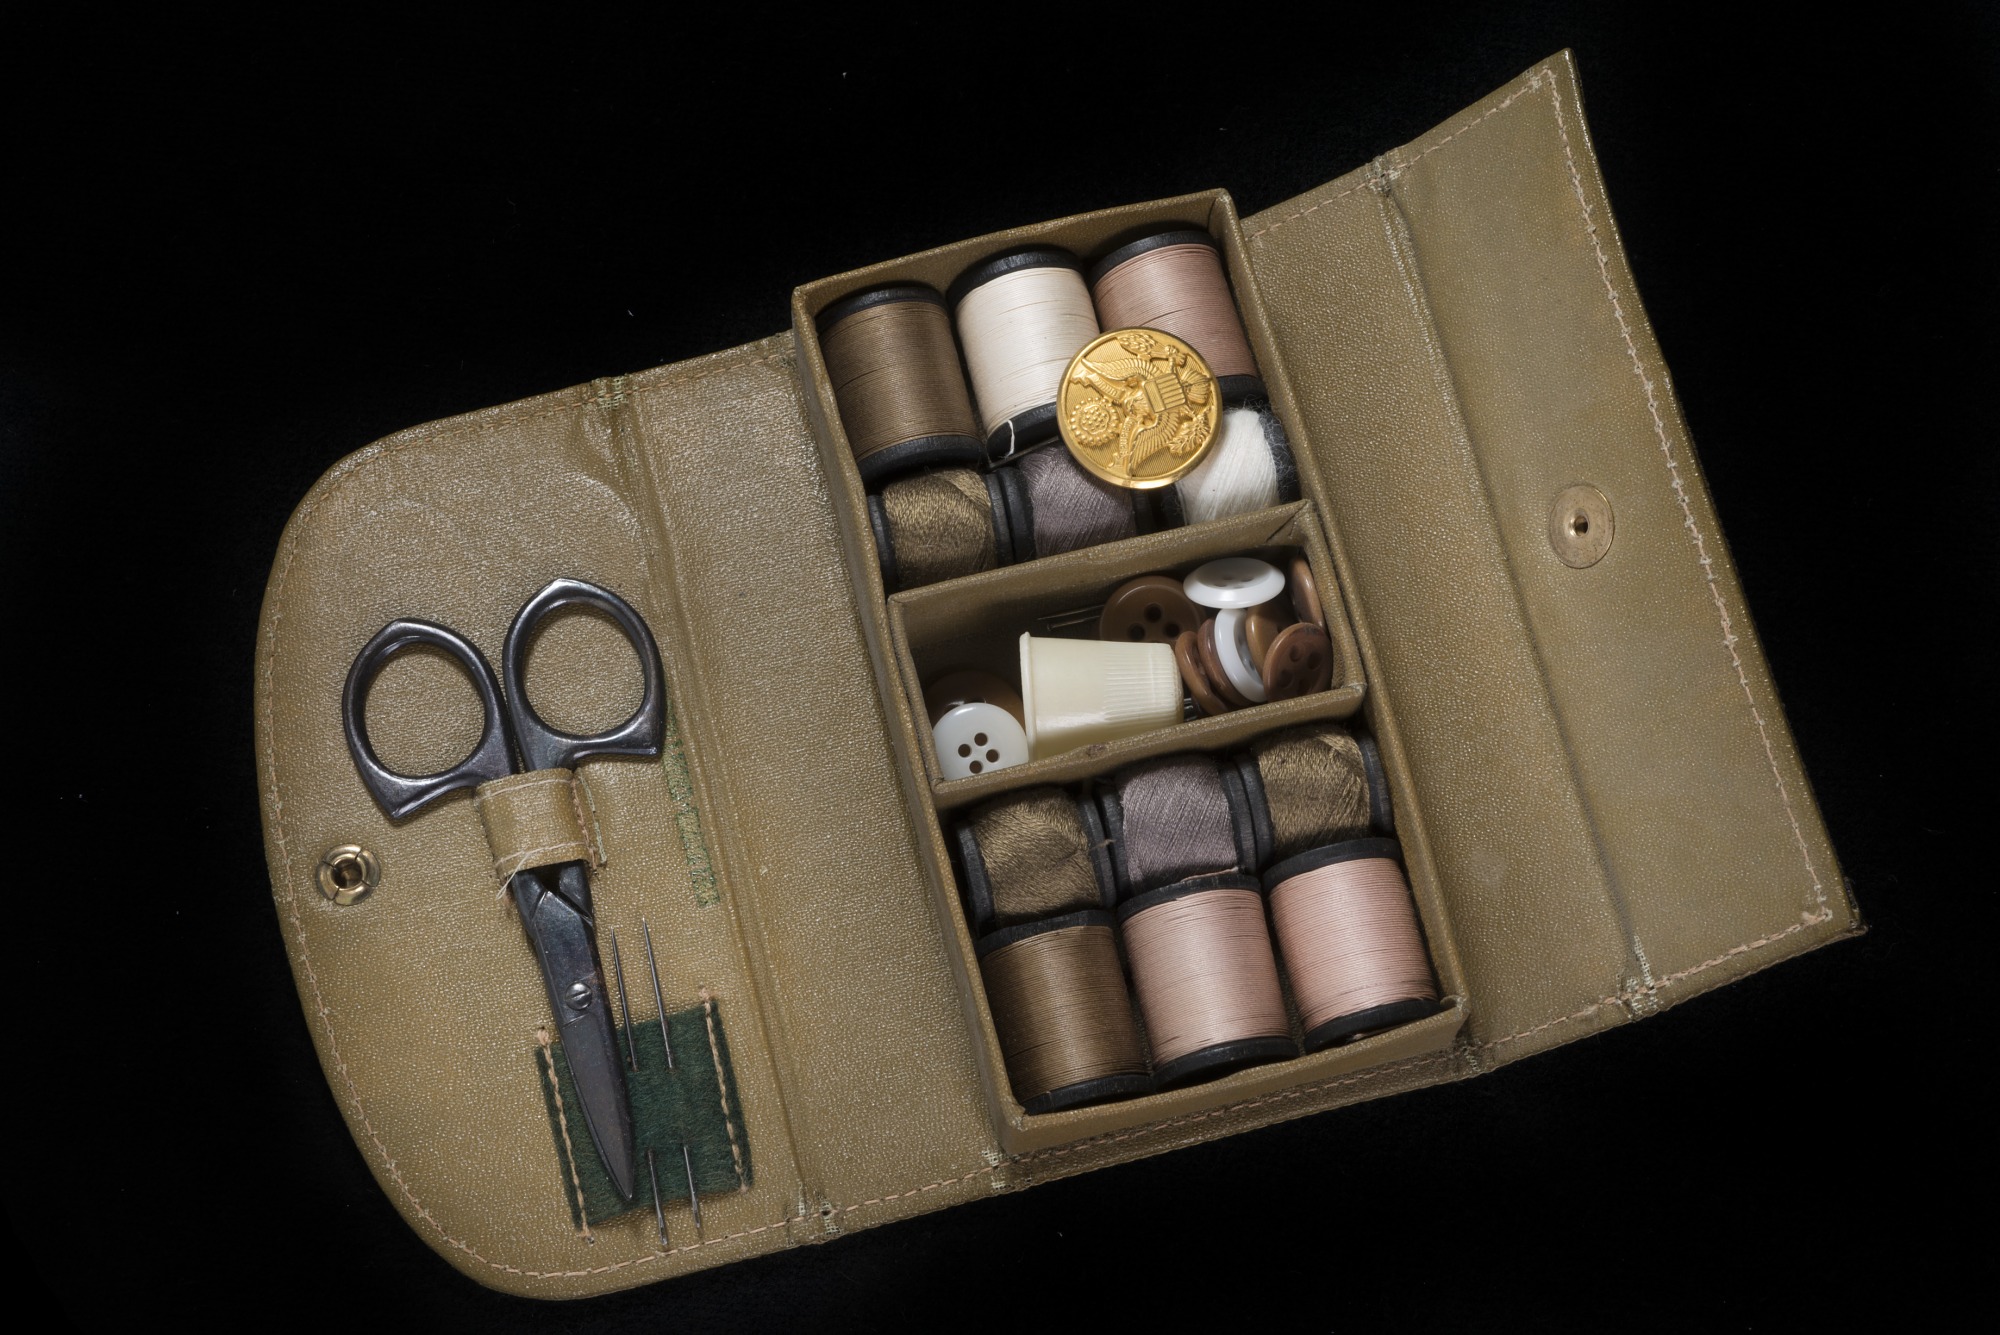 Sewing Kit, United States Army Air Forces